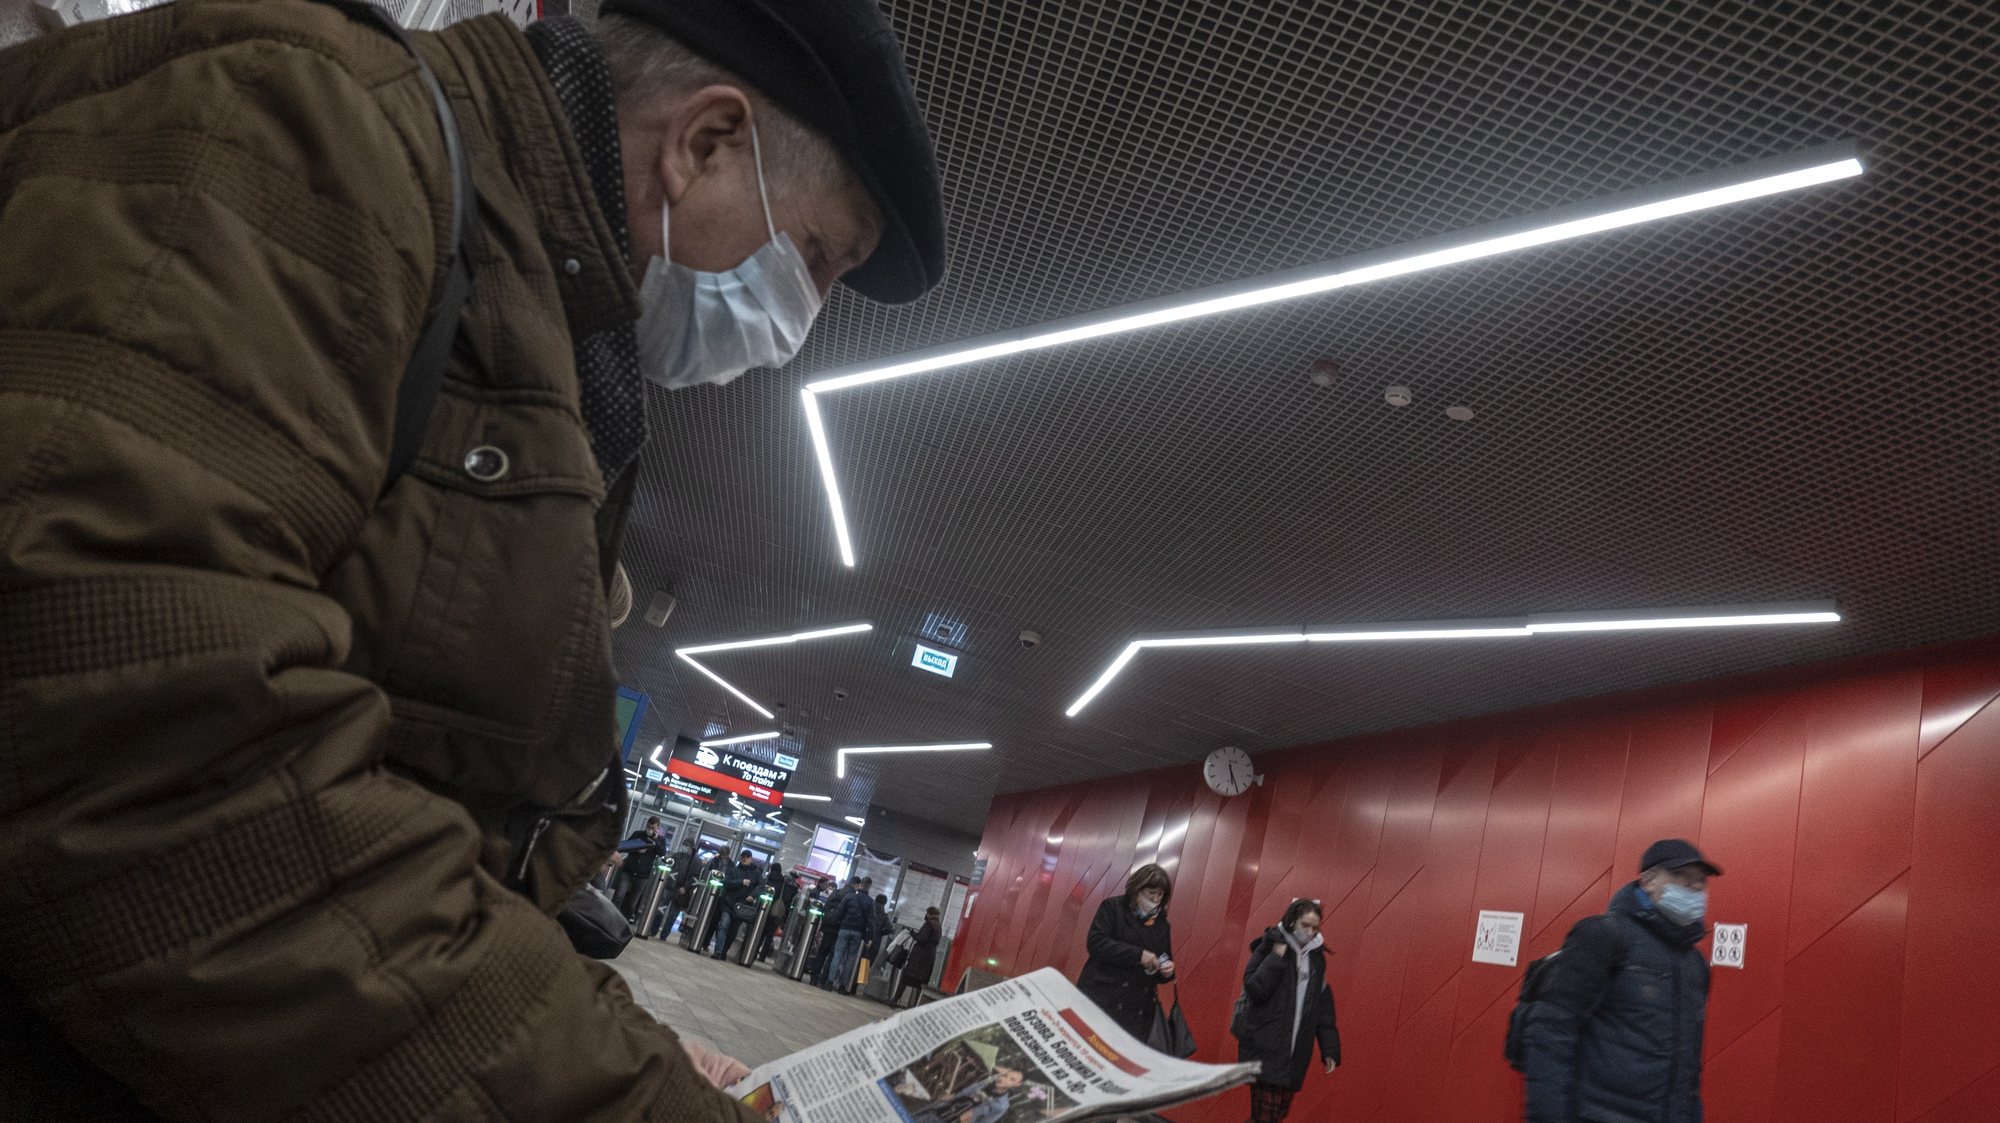 epa09117150 A man wearing a protective face mask reads a newspaper in a station of Moscow metro, Russia, 05 April 2021, amid the COVID-19 coronavirus pandemic.  EPA/SERGEI ILNITSKY